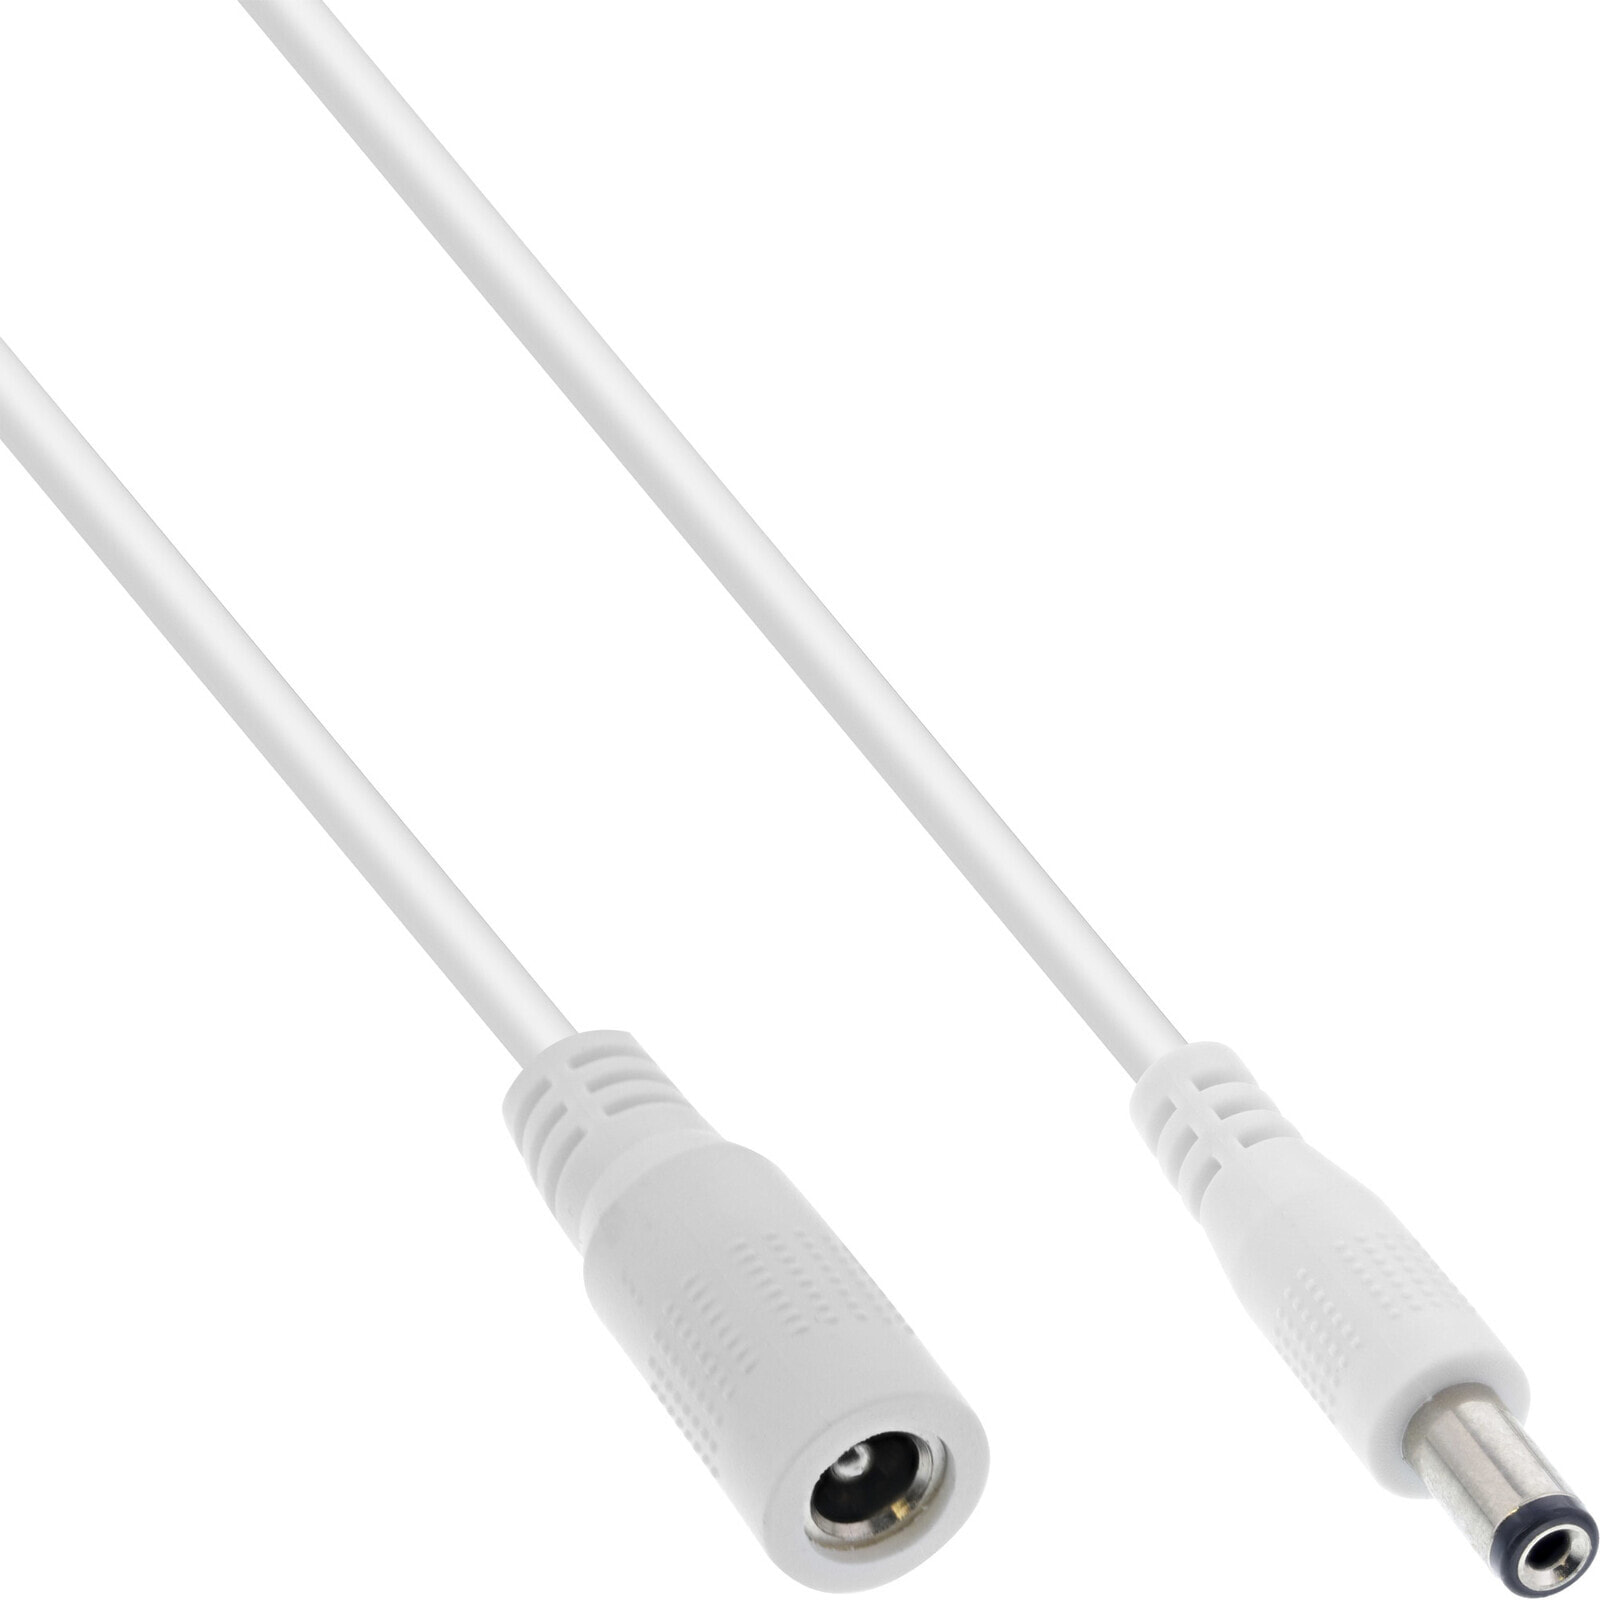 DC extension cable - DC male/female 5.5x2.5mm - AWG 18 - white 3m